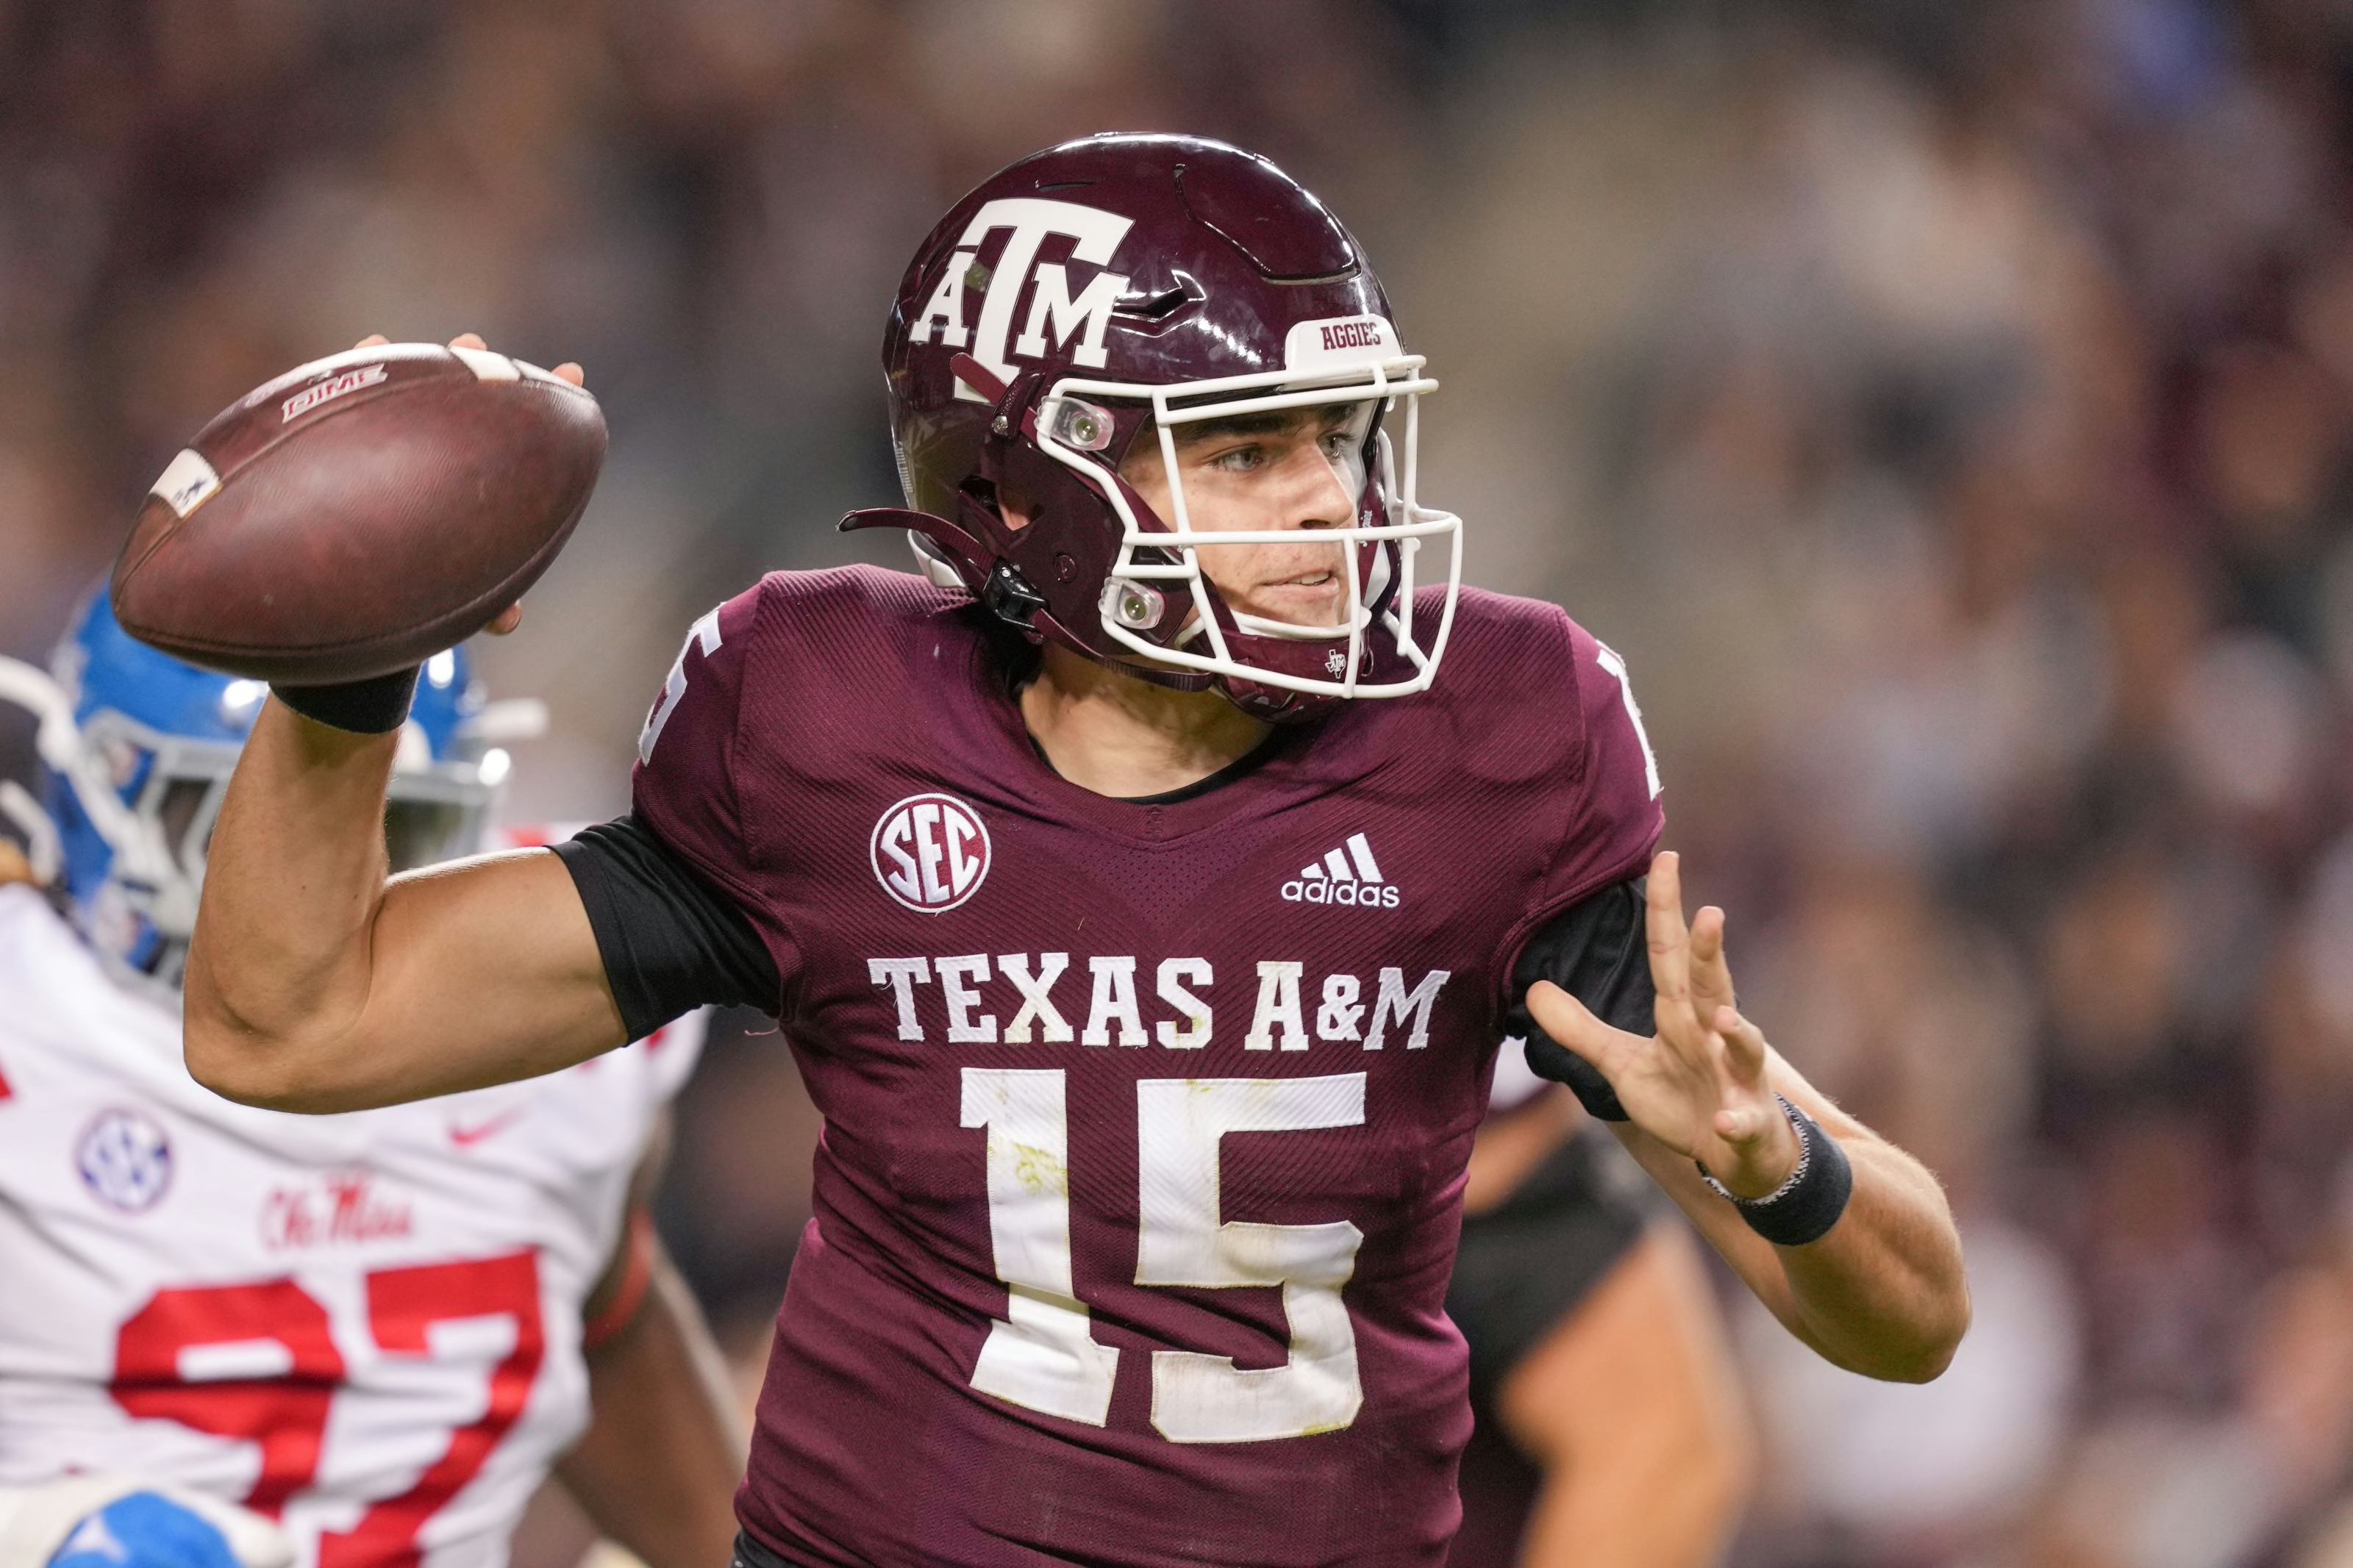 Texas A&M Football 3 Takeaways after the Ole Miss Loss